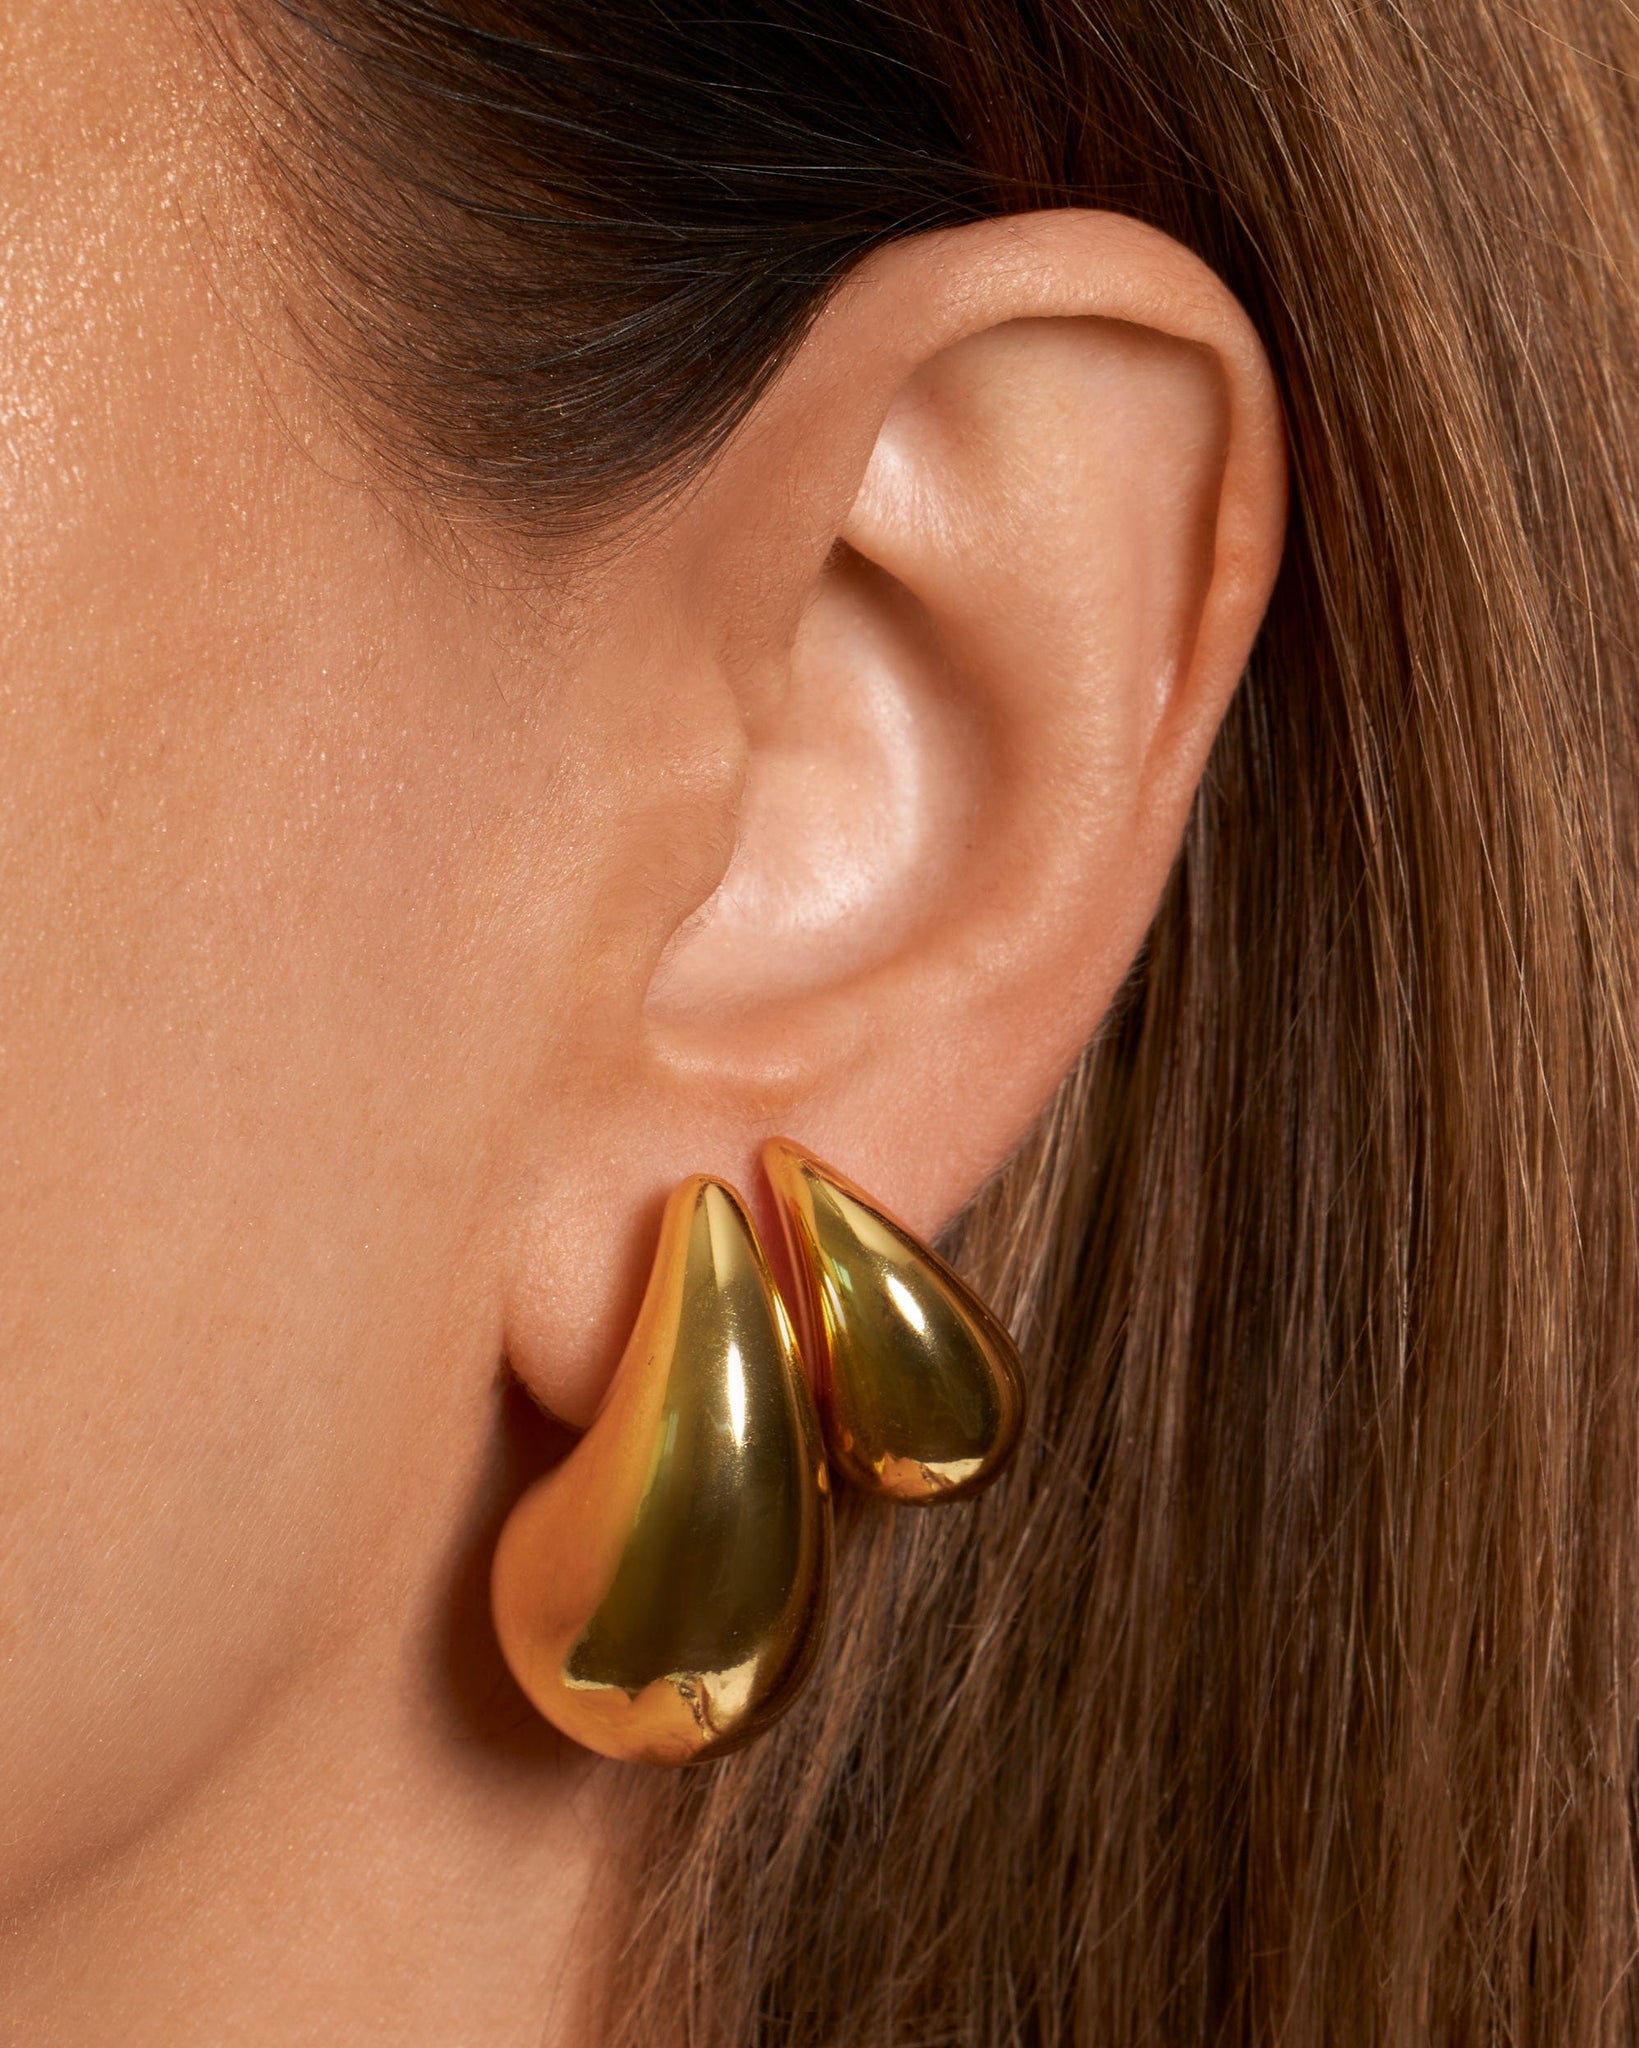 The Moda Hoop Duo is worn in an asymmetrical earring stack where the smaller teardrop of the Moda Hoop Mini lays atop the larger golden curve of the Moda Hoop earring.